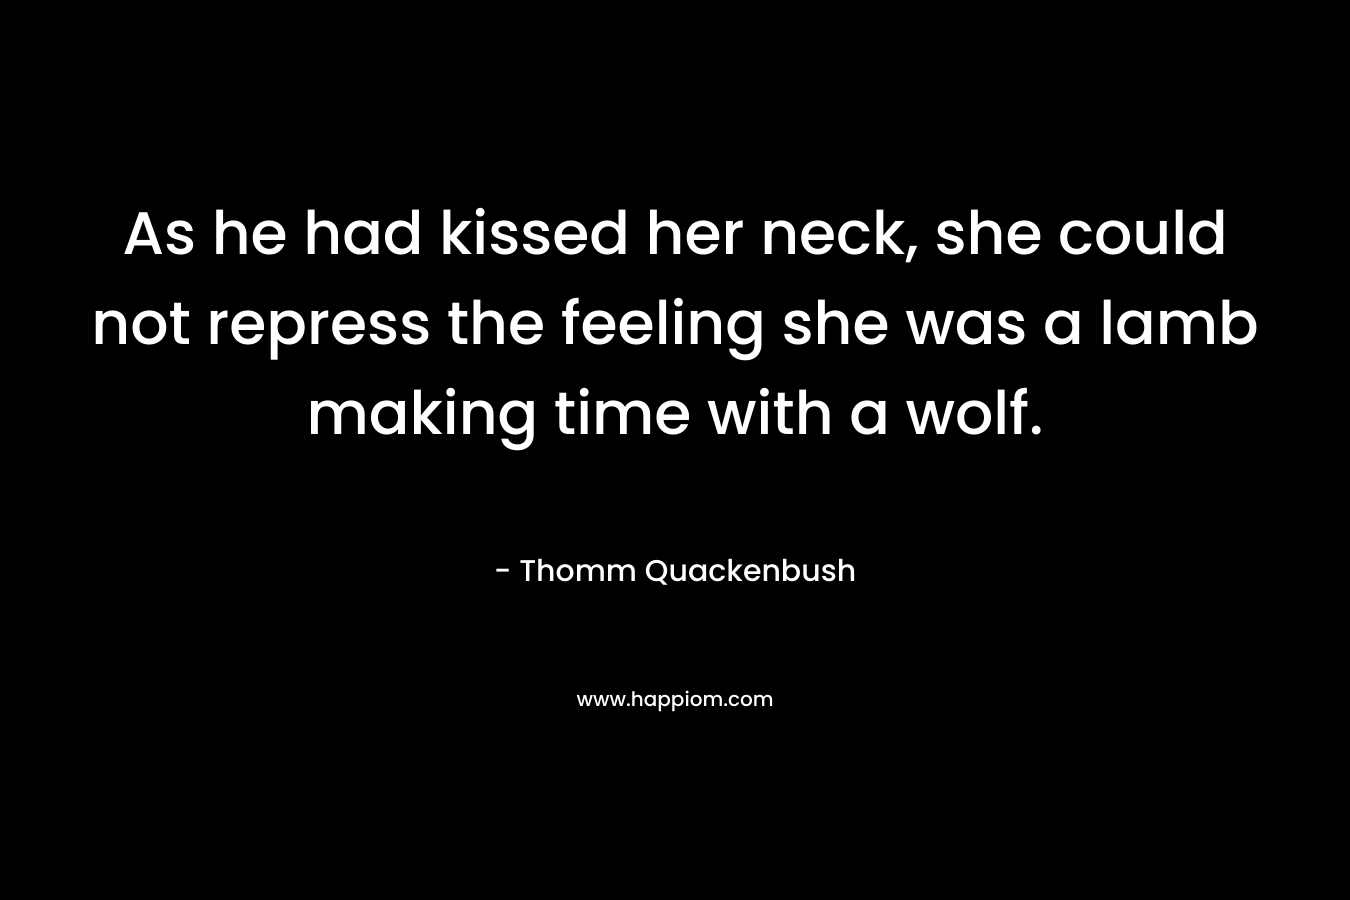 As he had kissed her neck, she could not repress the feeling she was a lamb making time with a wolf. – Thomm Quackenbush